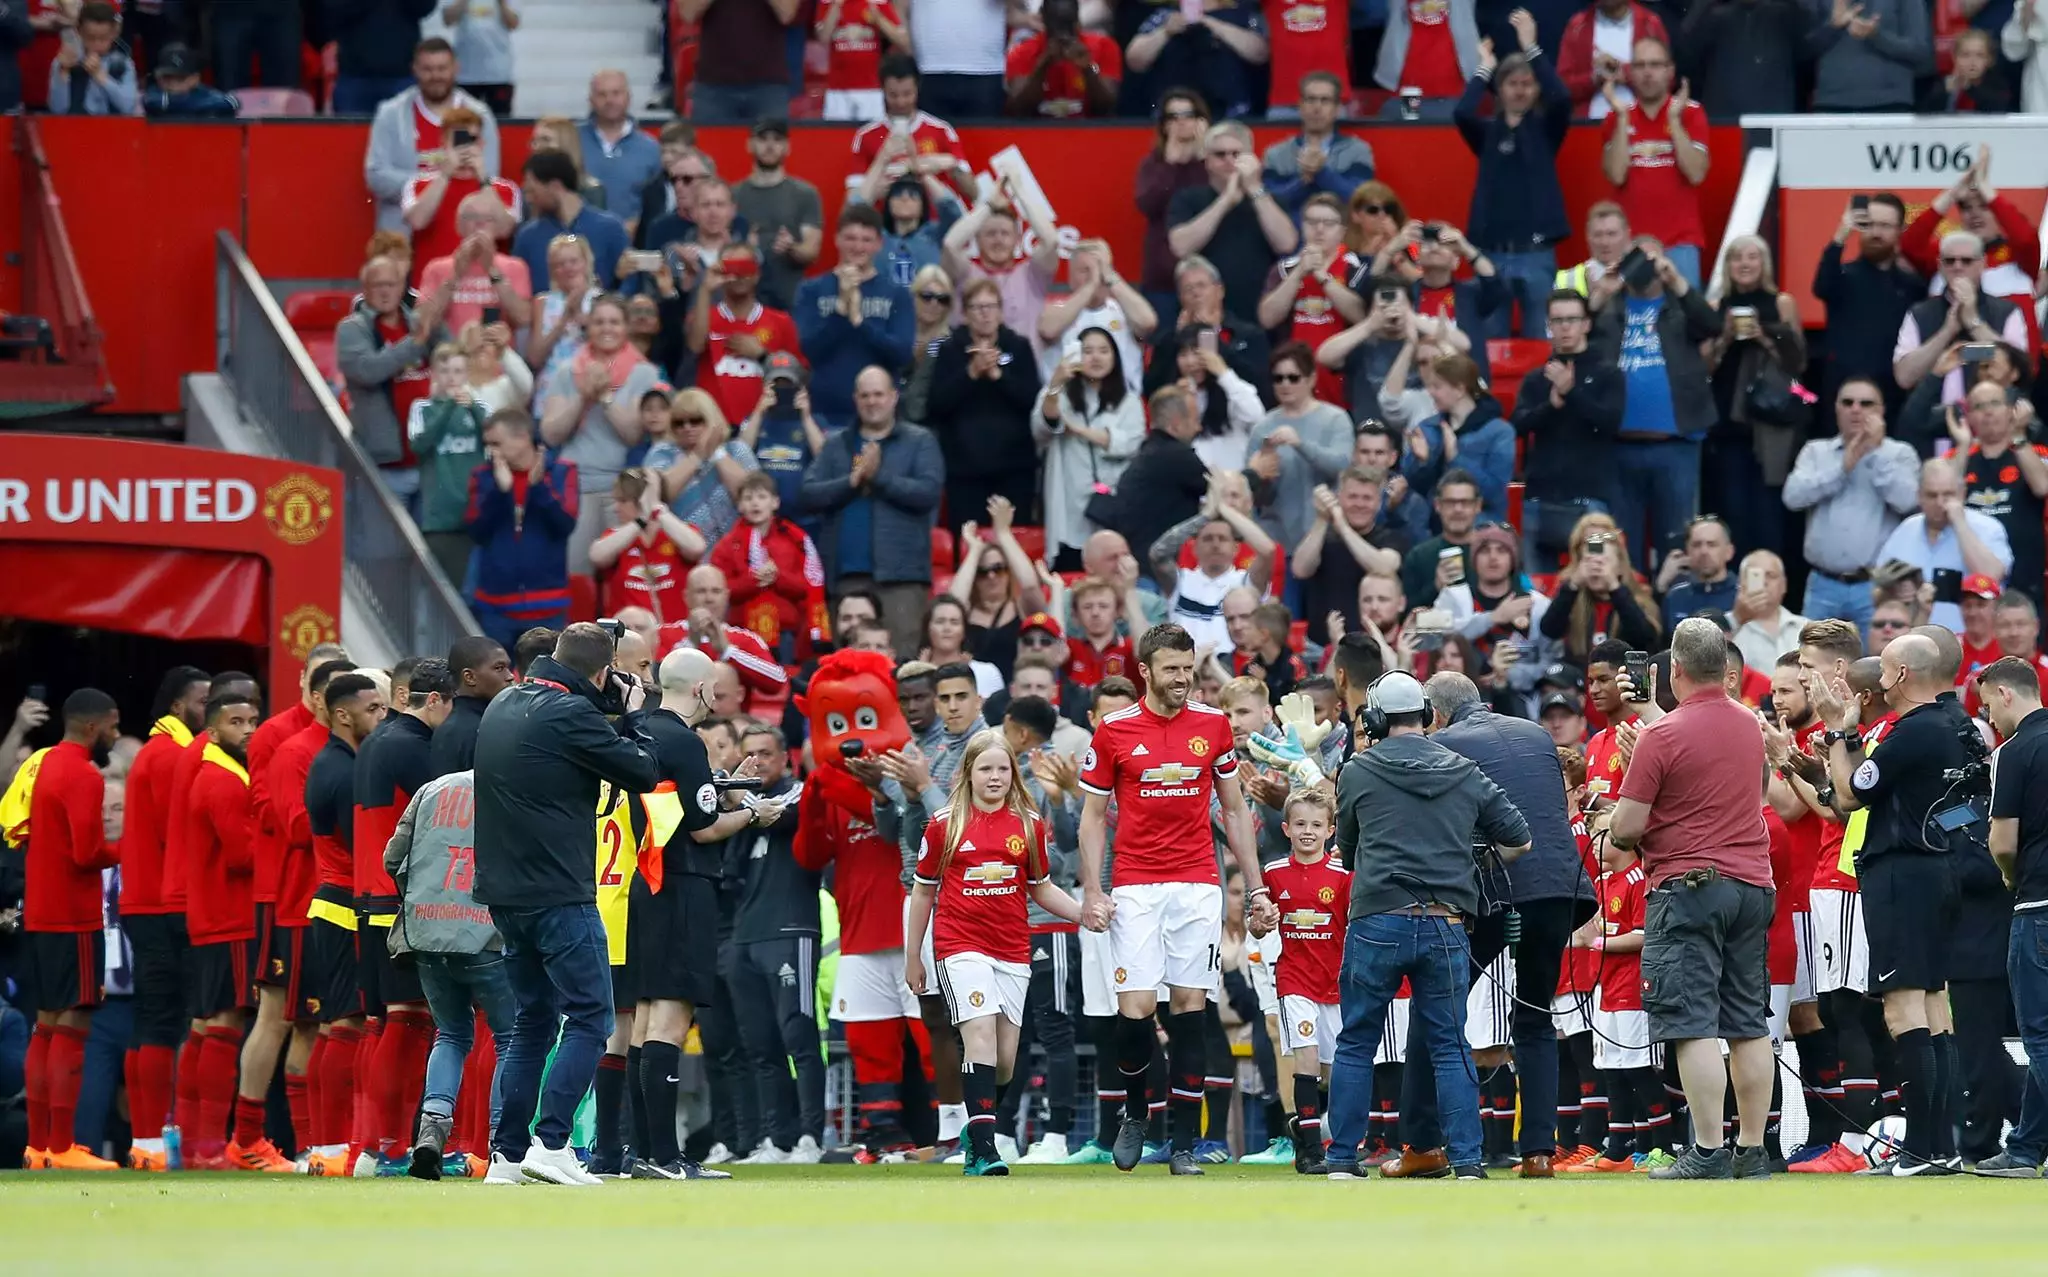 Carrick leads out the United team through a guard of honour. Image: PA